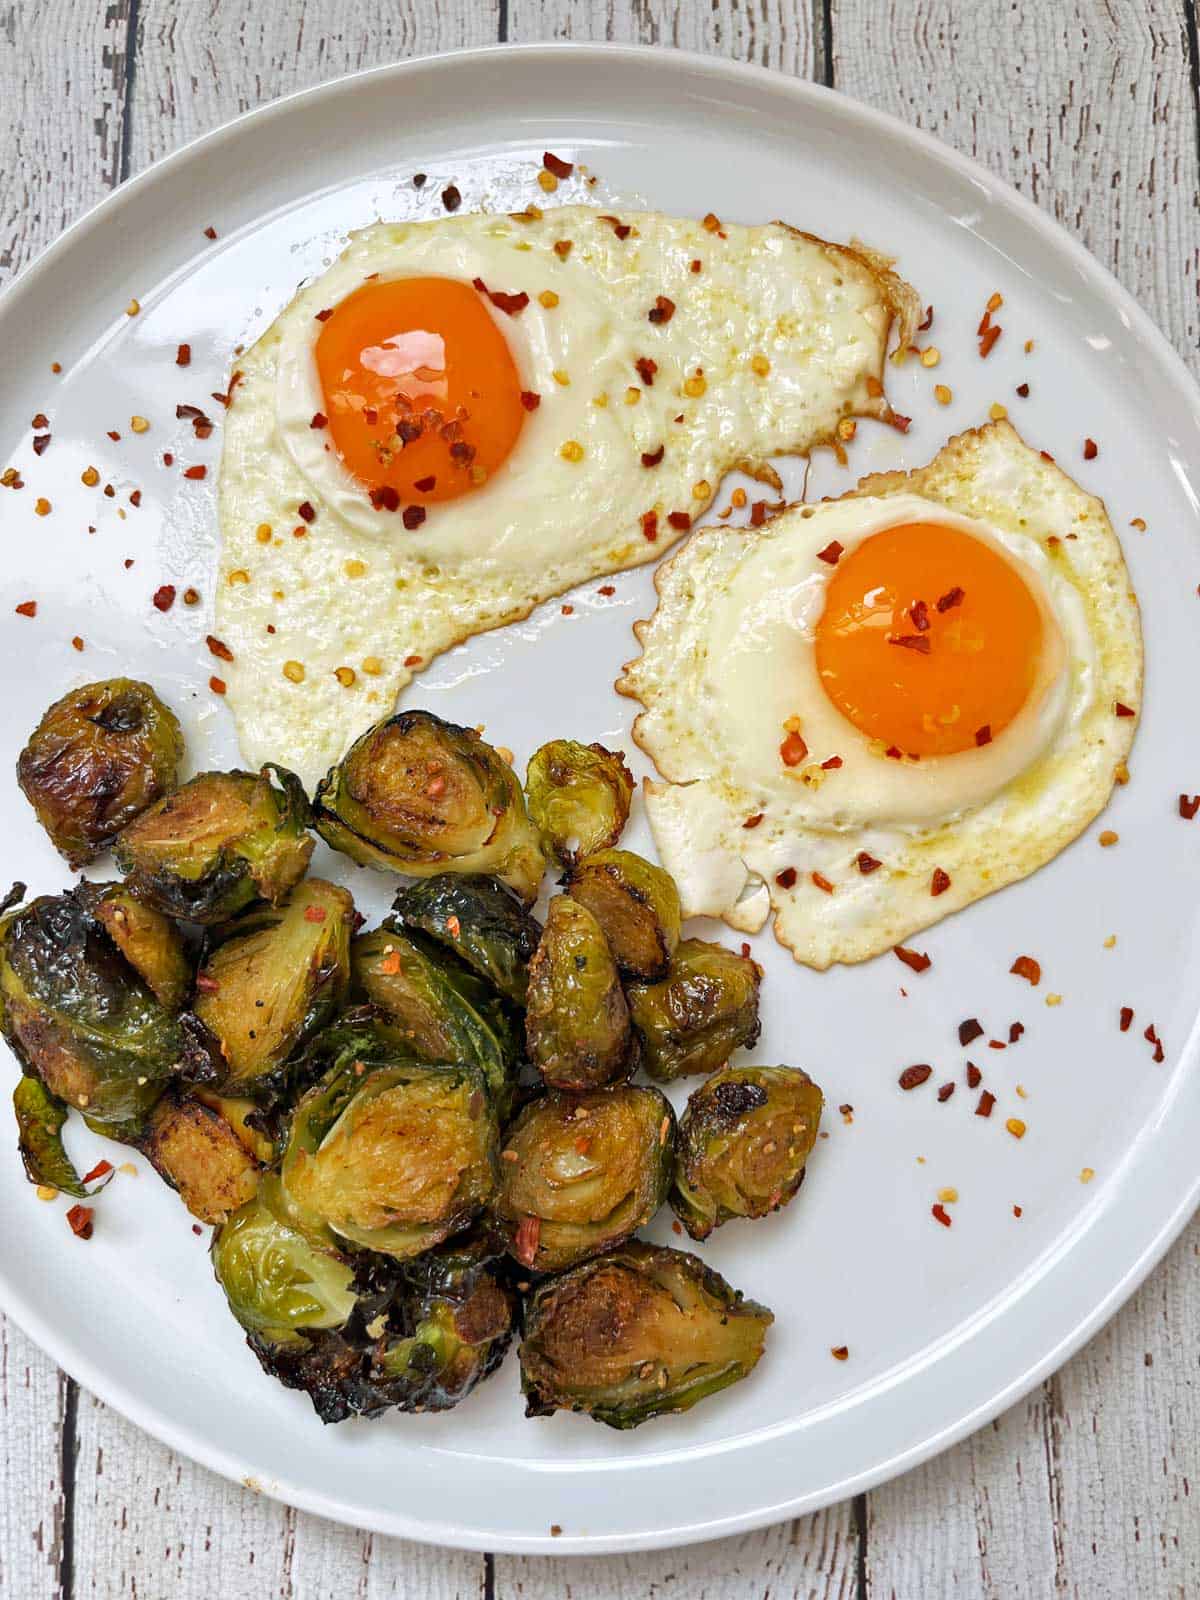 Roasted Brussels sprouts are served with fried eggs.